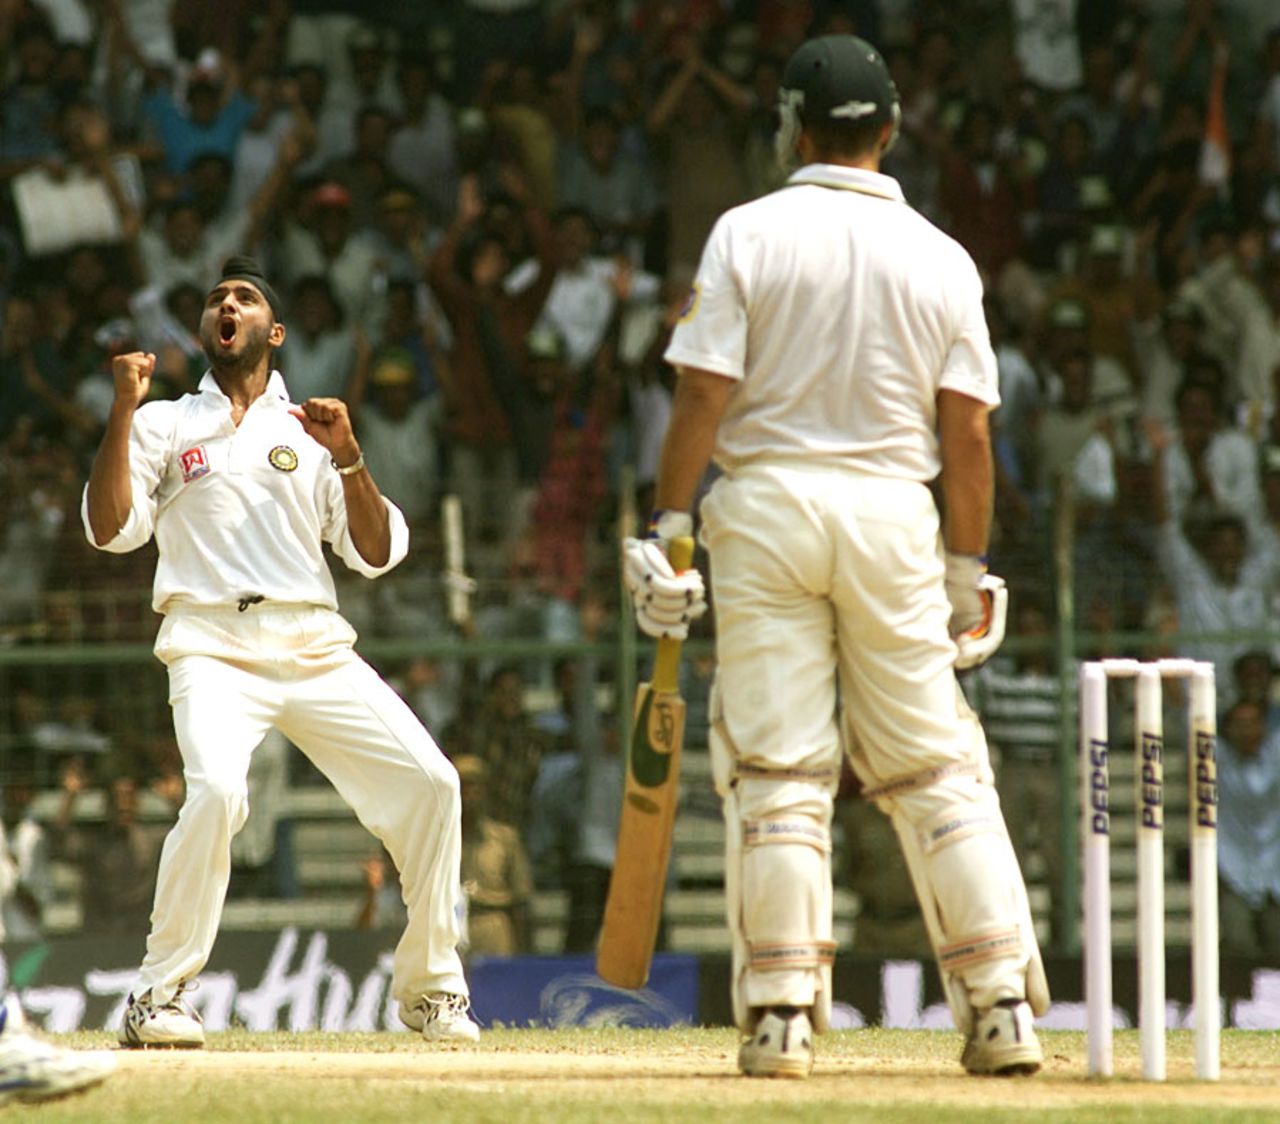 Harbhajan Singh celebrates the wicket of Colin Miller, India v Australia, 3rd Test, Chennai, 5th day, March 22, 2001